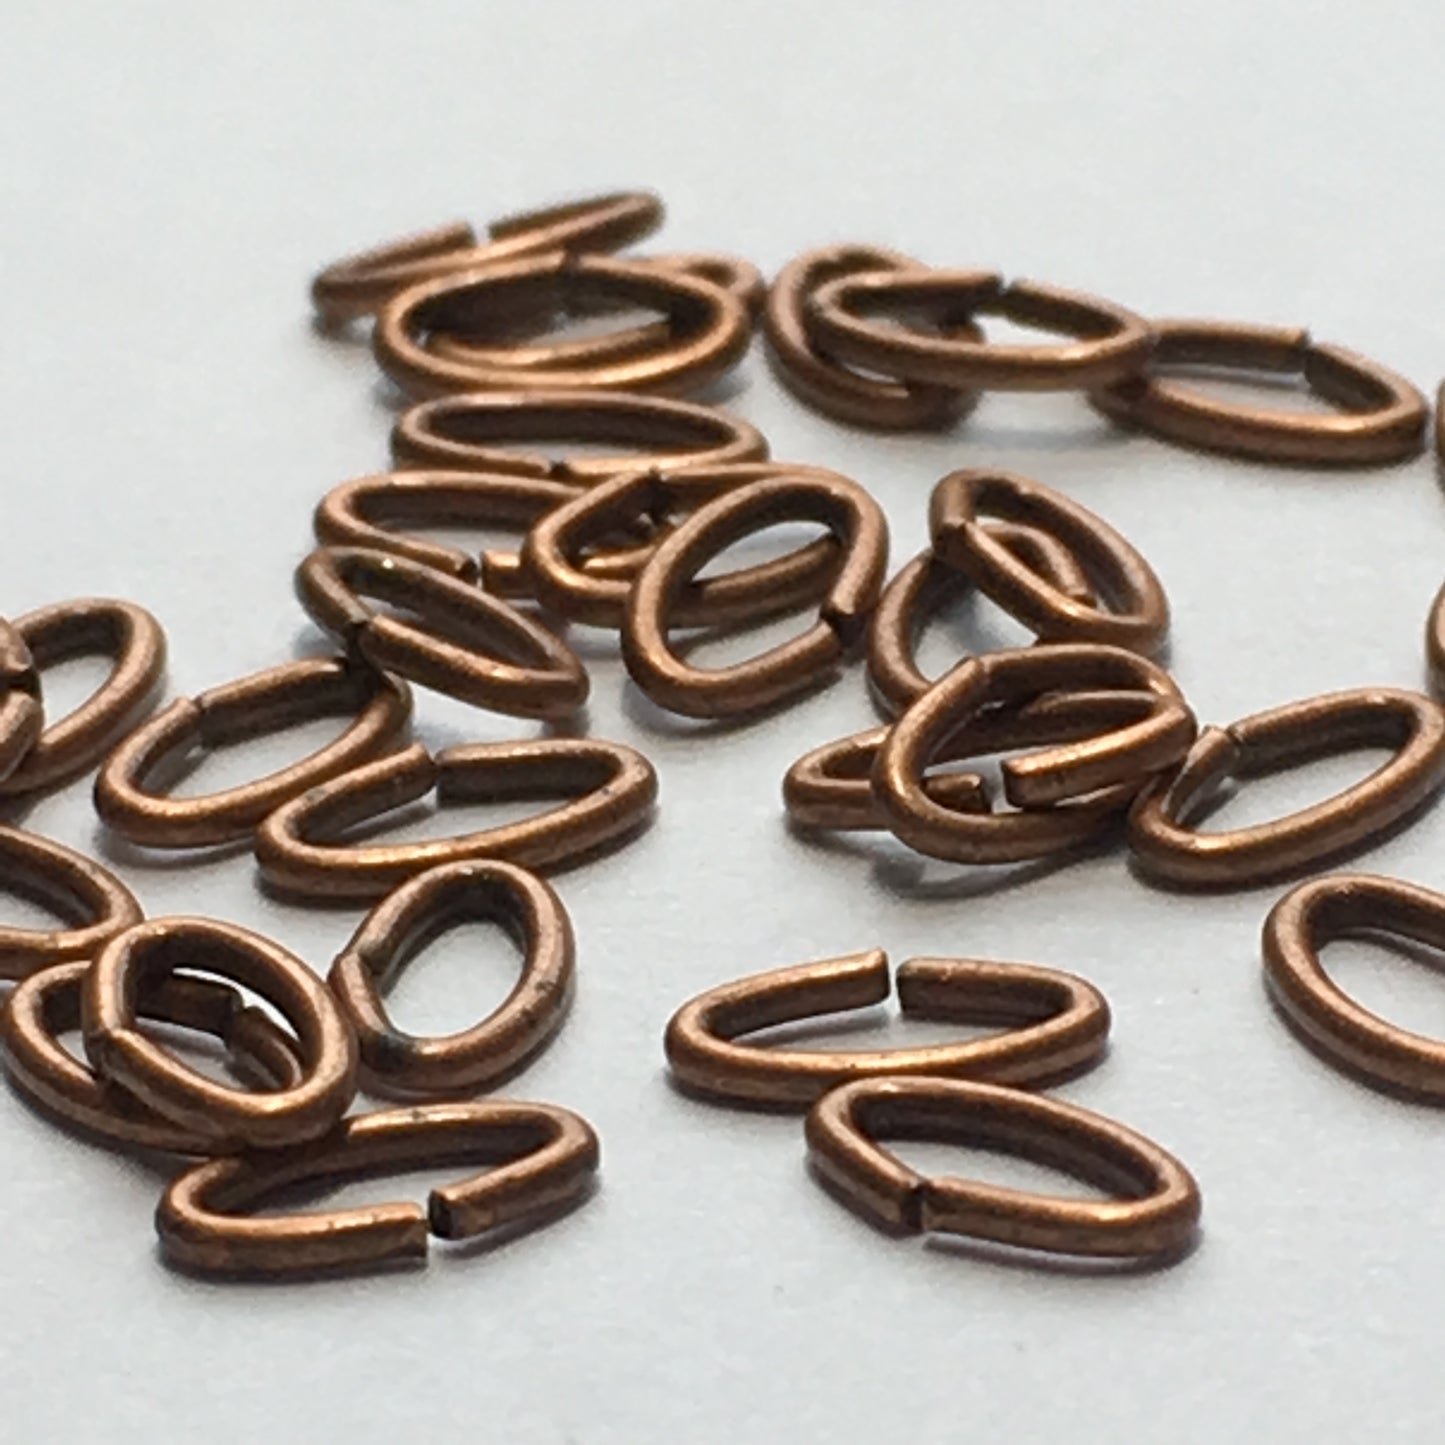 Copper Chain Links, 6 x 3 mm, 20 or 25 Links